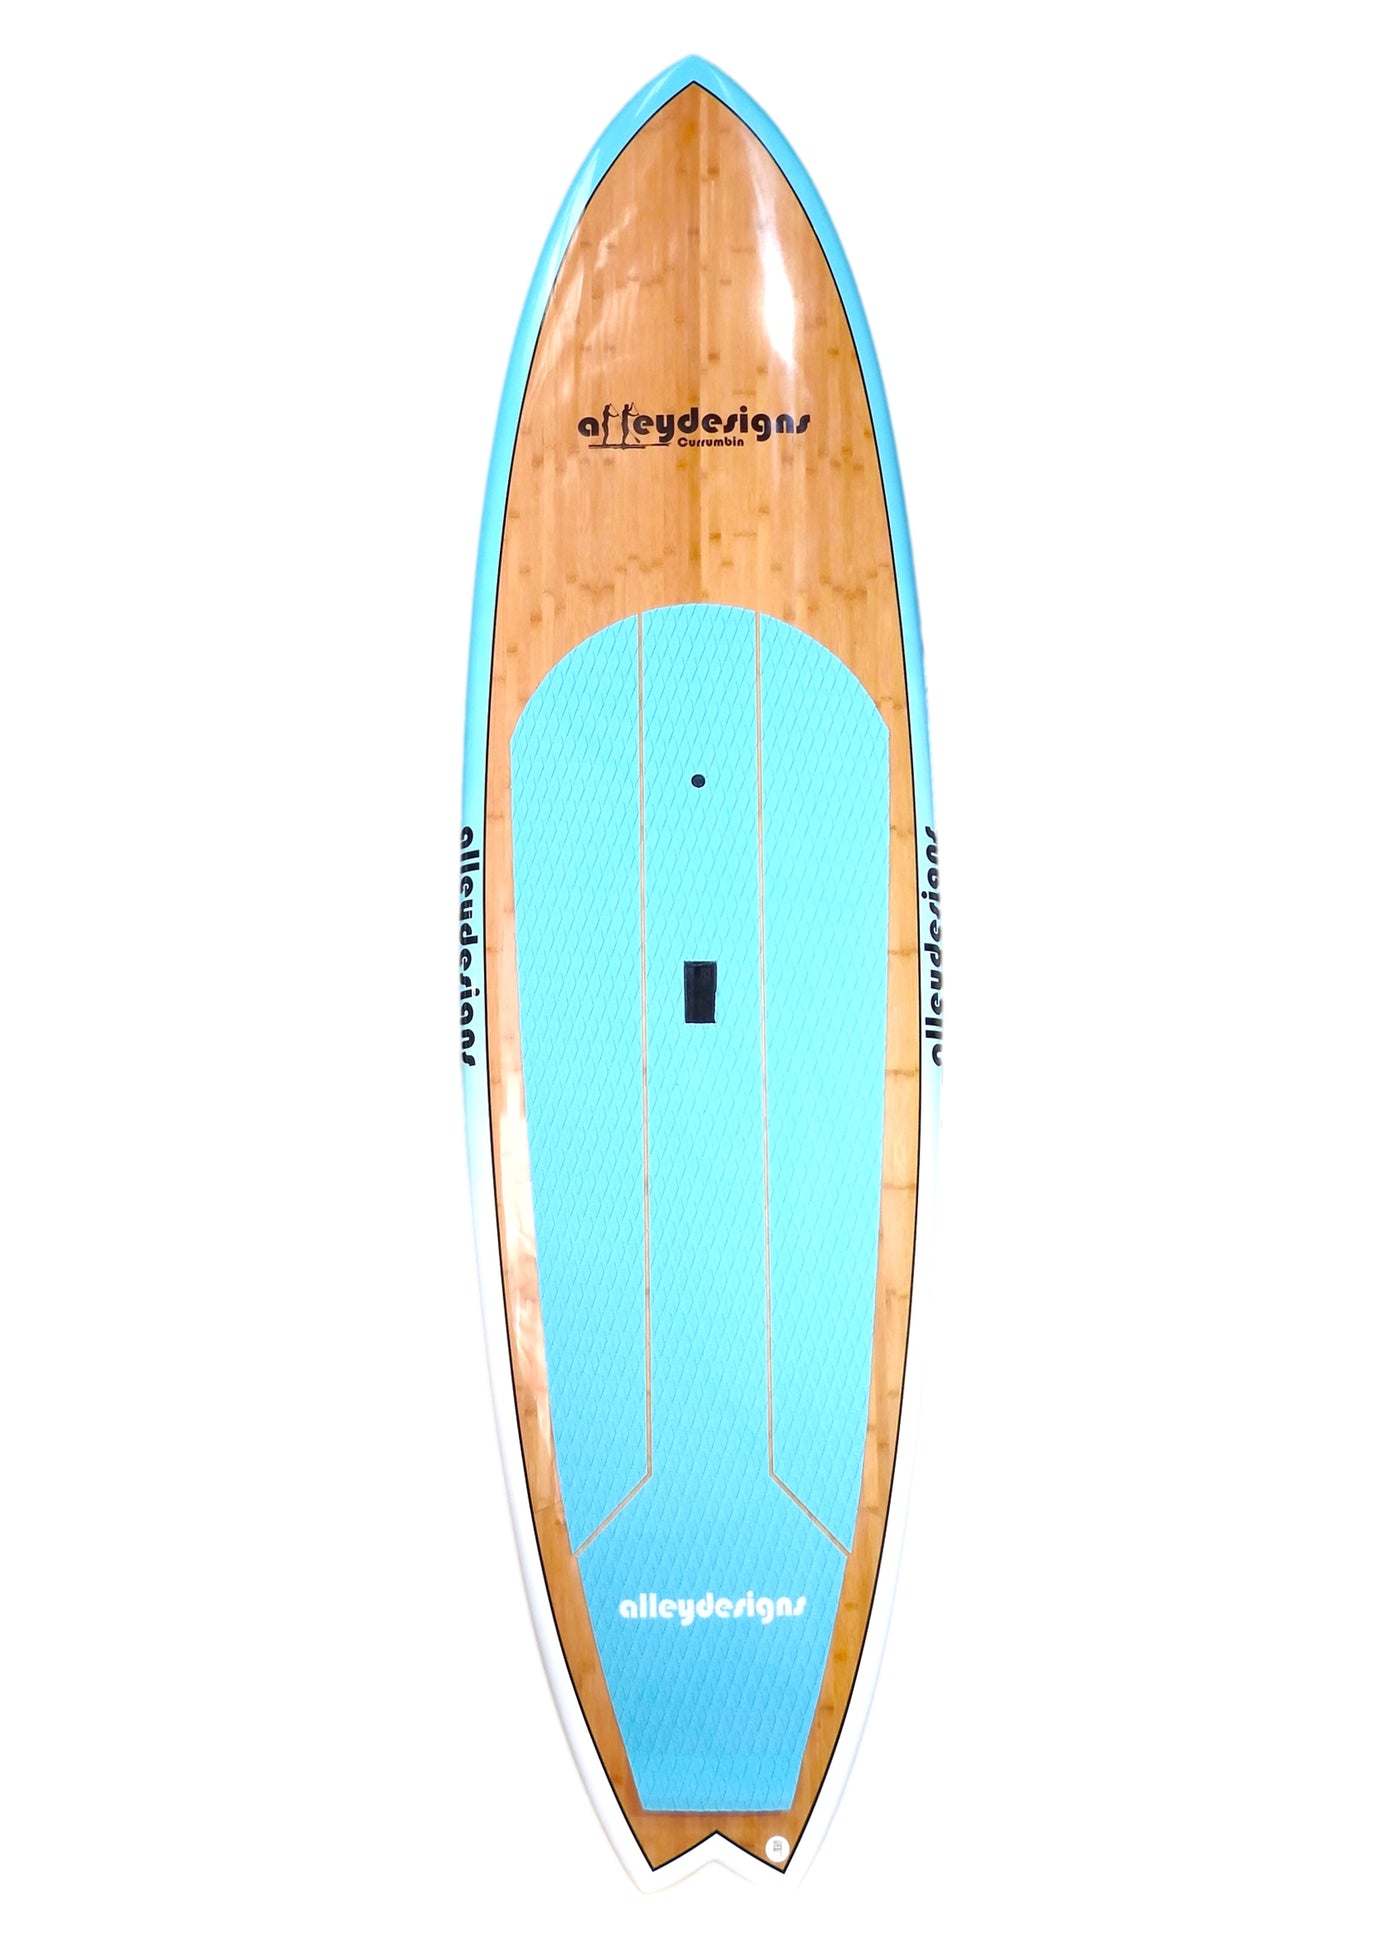 10' x 32" Bamboo Performance Teal Fade Alleydesigns SUP 9KG - Alleydesigns  Pty Ltd                                             ABN: 44165571264